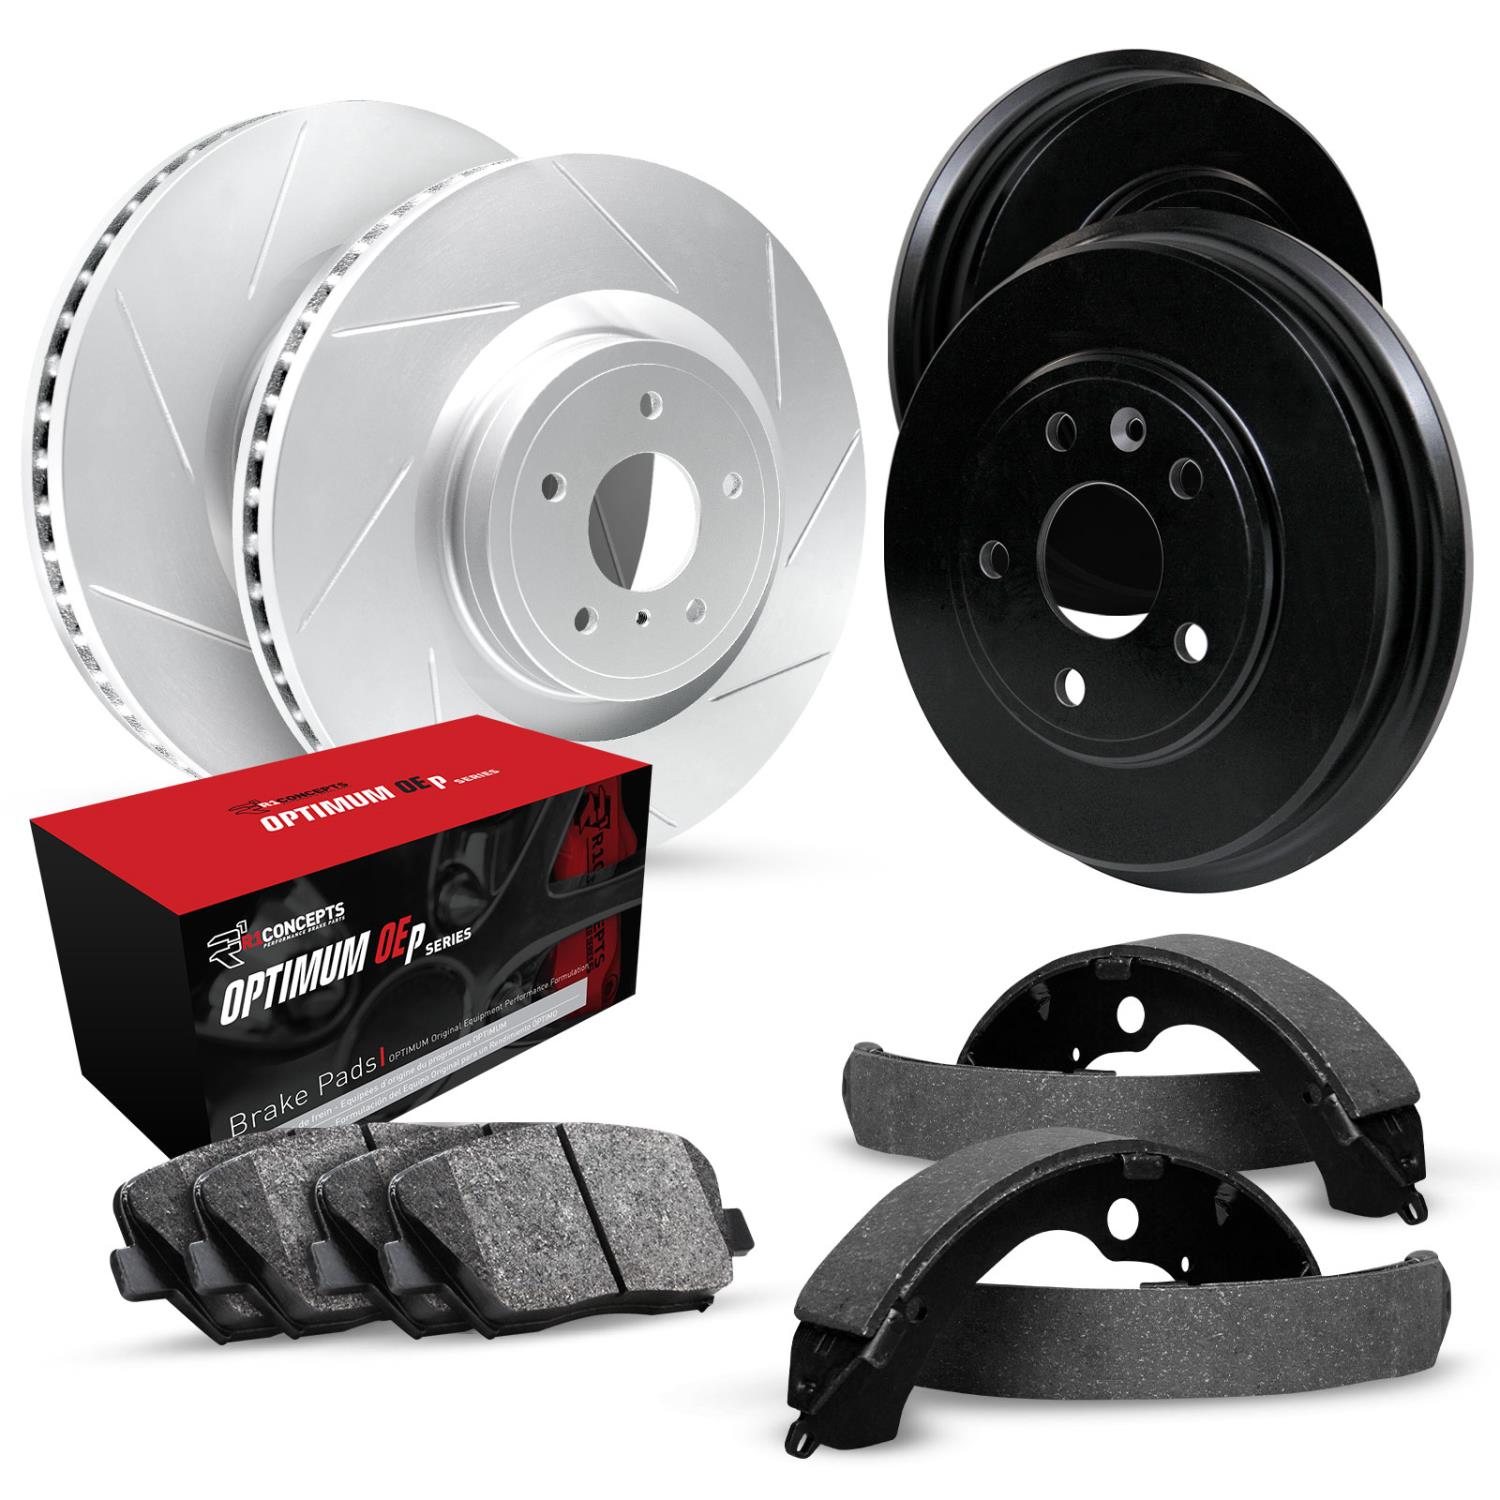 GEO-Carbon Slotted Brake Rotor & Drum Set w/Optimum OE Pads & Shoes, 1988-1989 Acura/Honda, Position: Front & Rear